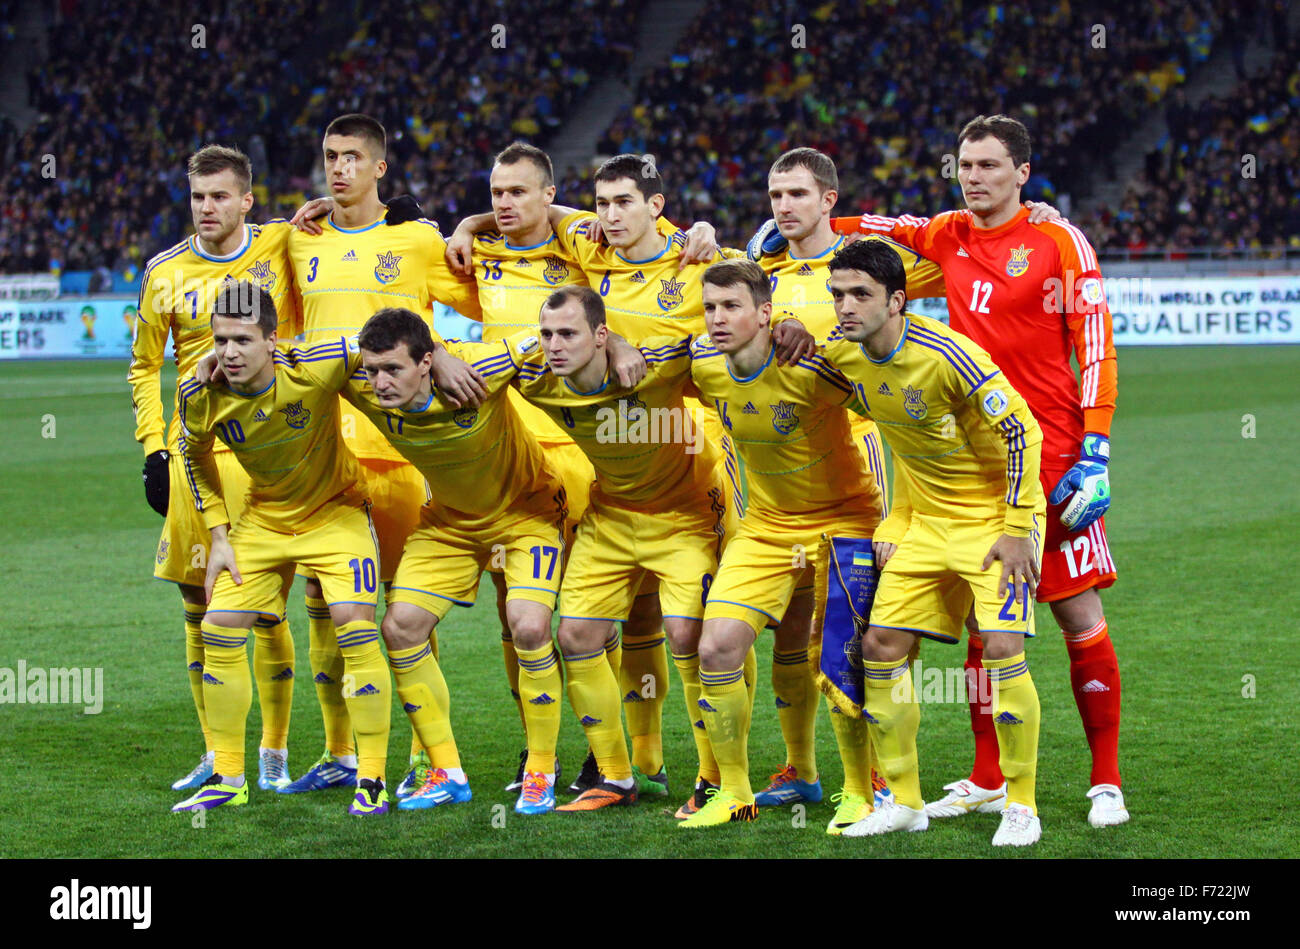 KYIV, UKRAINE - NOVEMBER 15, 2013: Ukraine national football team pose for a group photo before FIFA World Cup 2014 qualifier game against France on November 15, 2013 in Kyiv, Ukraine Stock Photo